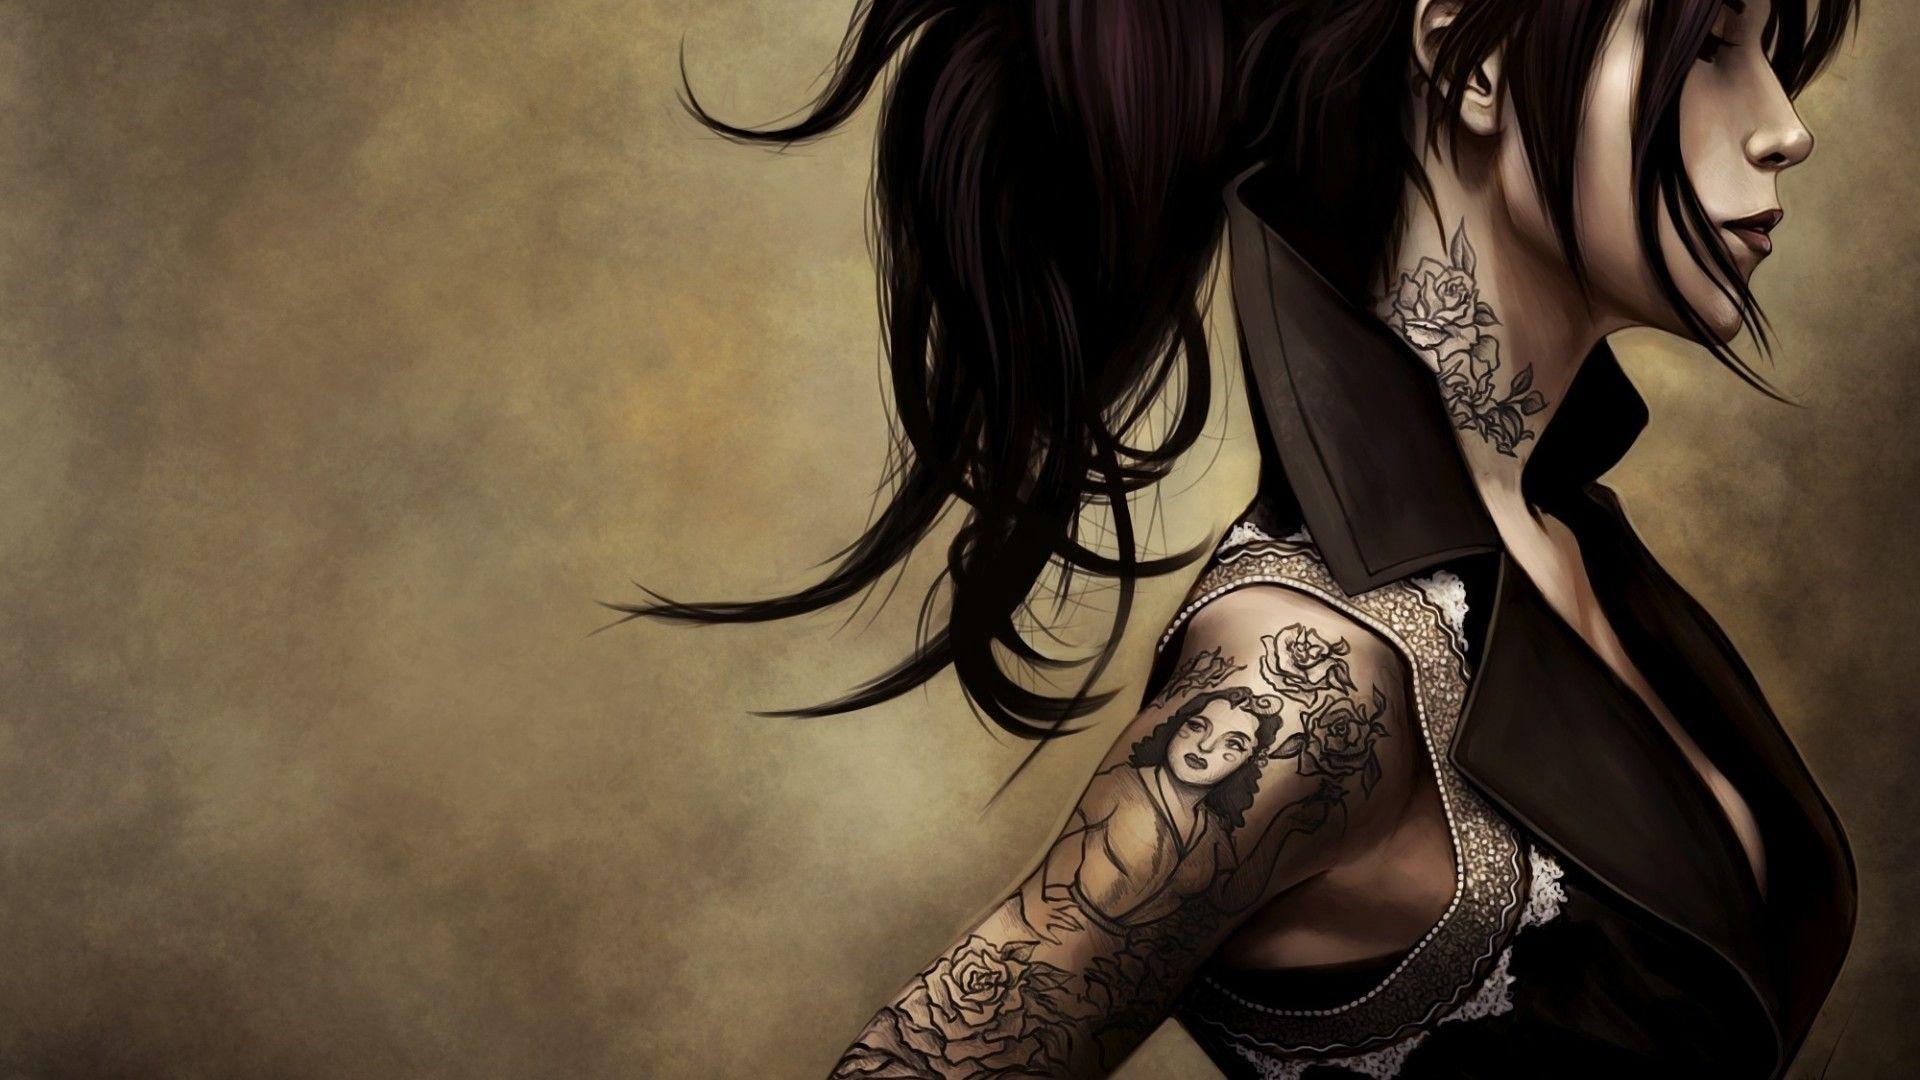 25 Incredible Anime Villain Tattoos For Those With A Dark Side